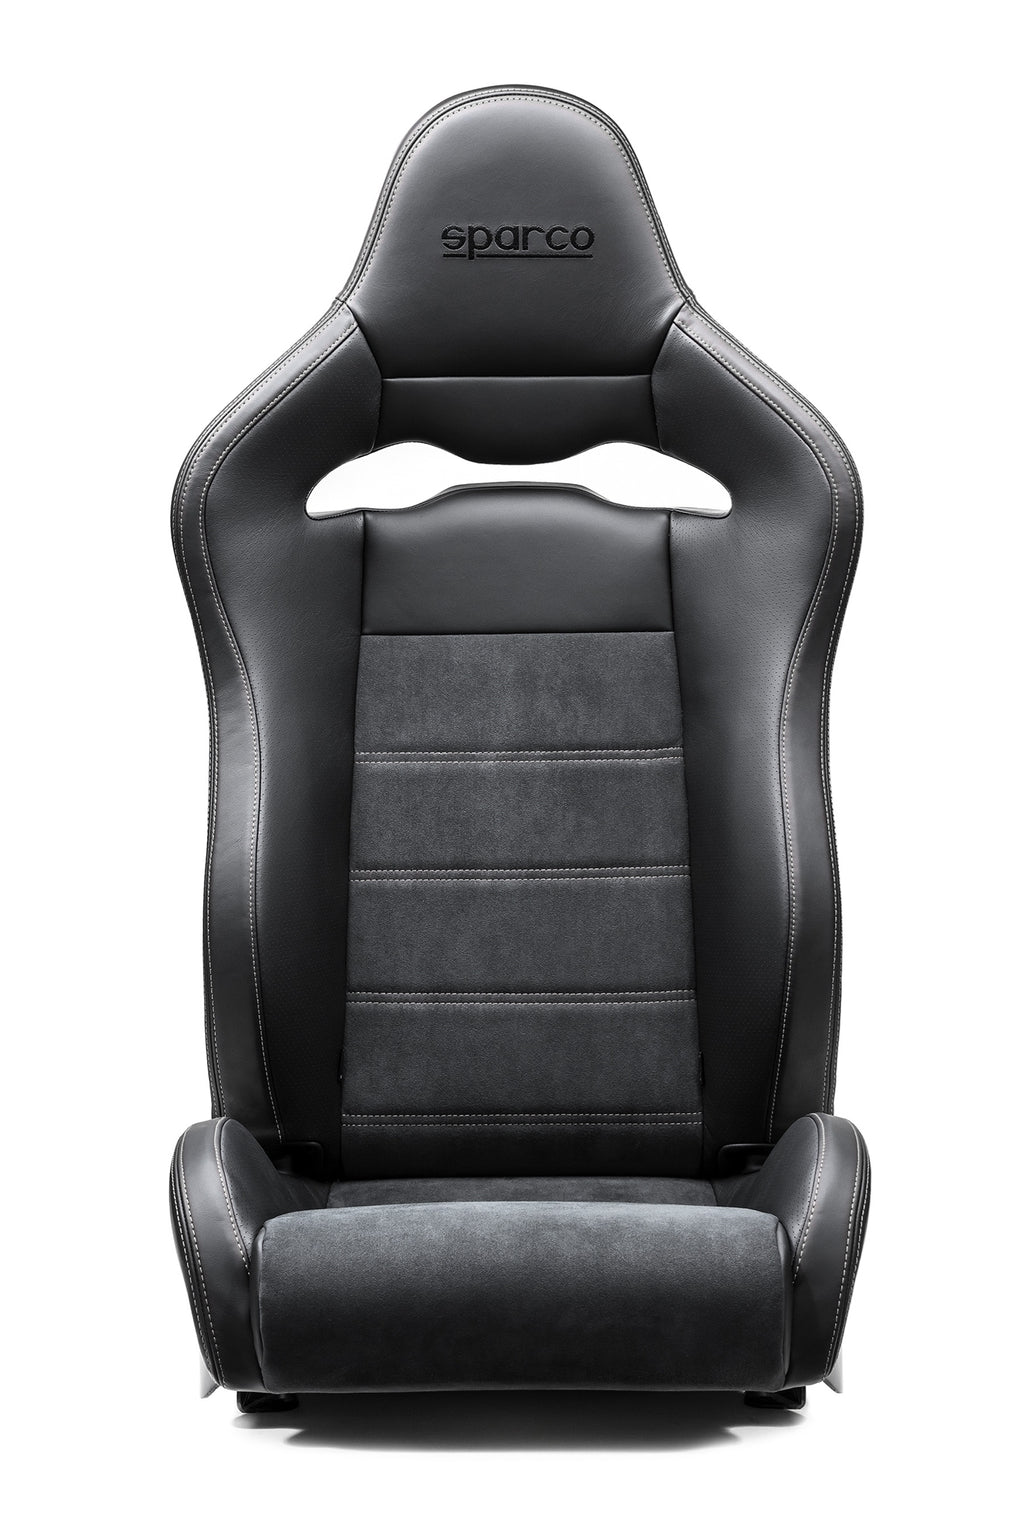 Sparco - SPX Special Edition Touring Seat